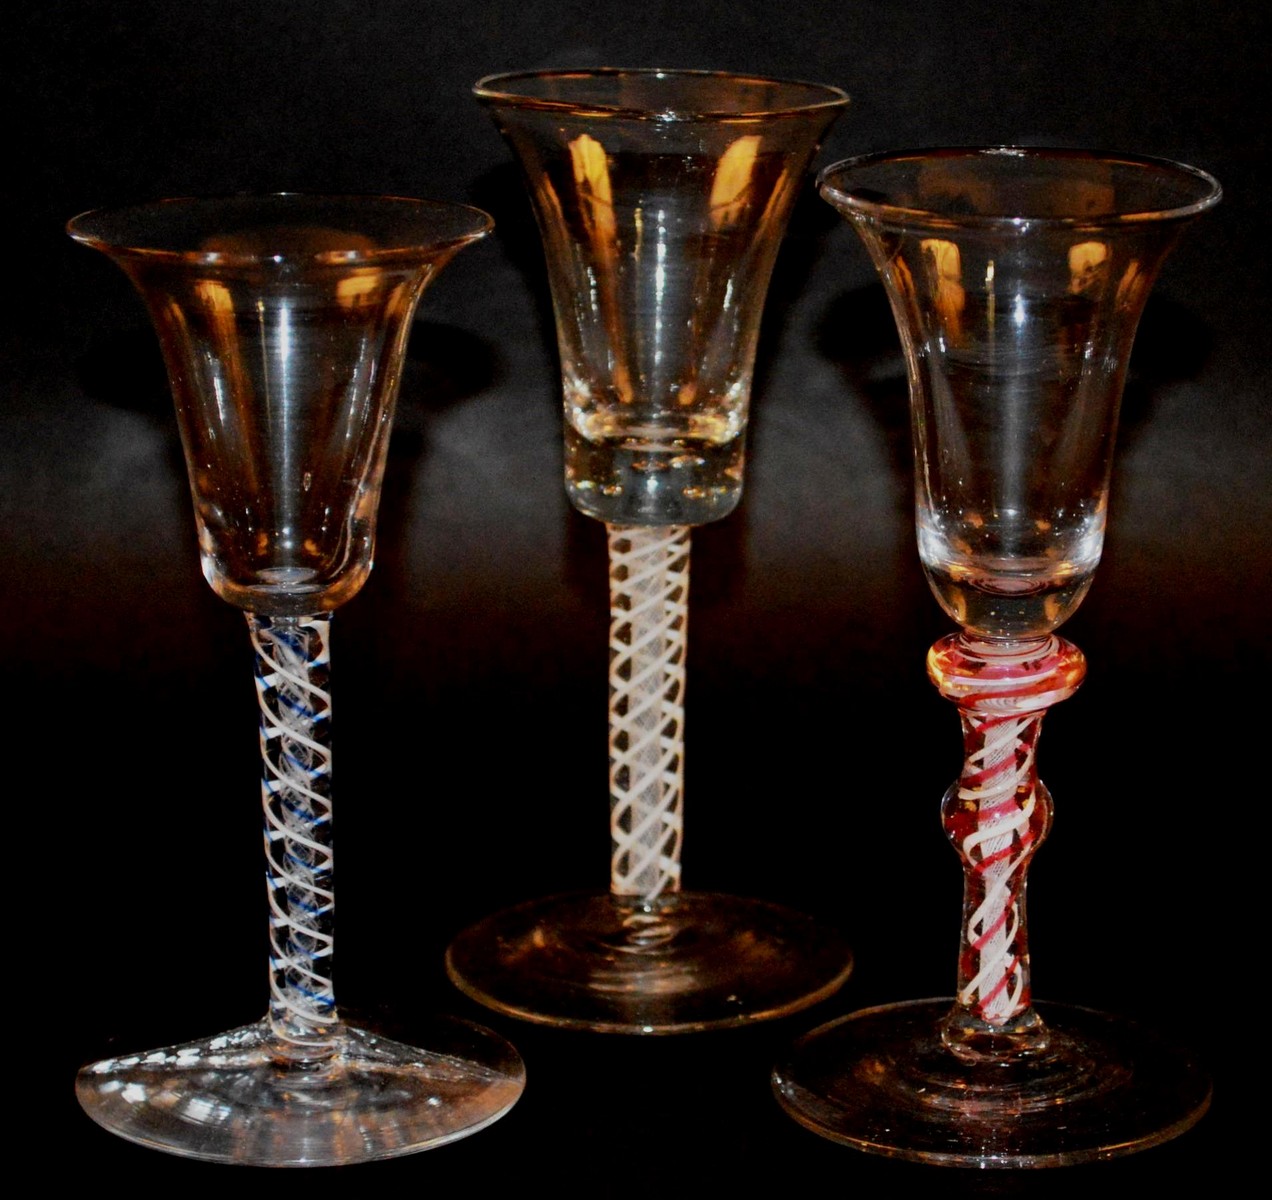 THREE WINE GLASSES with inverted bell bowls and coloured stems. 5.75ins, 6.25ins (2) high (3).